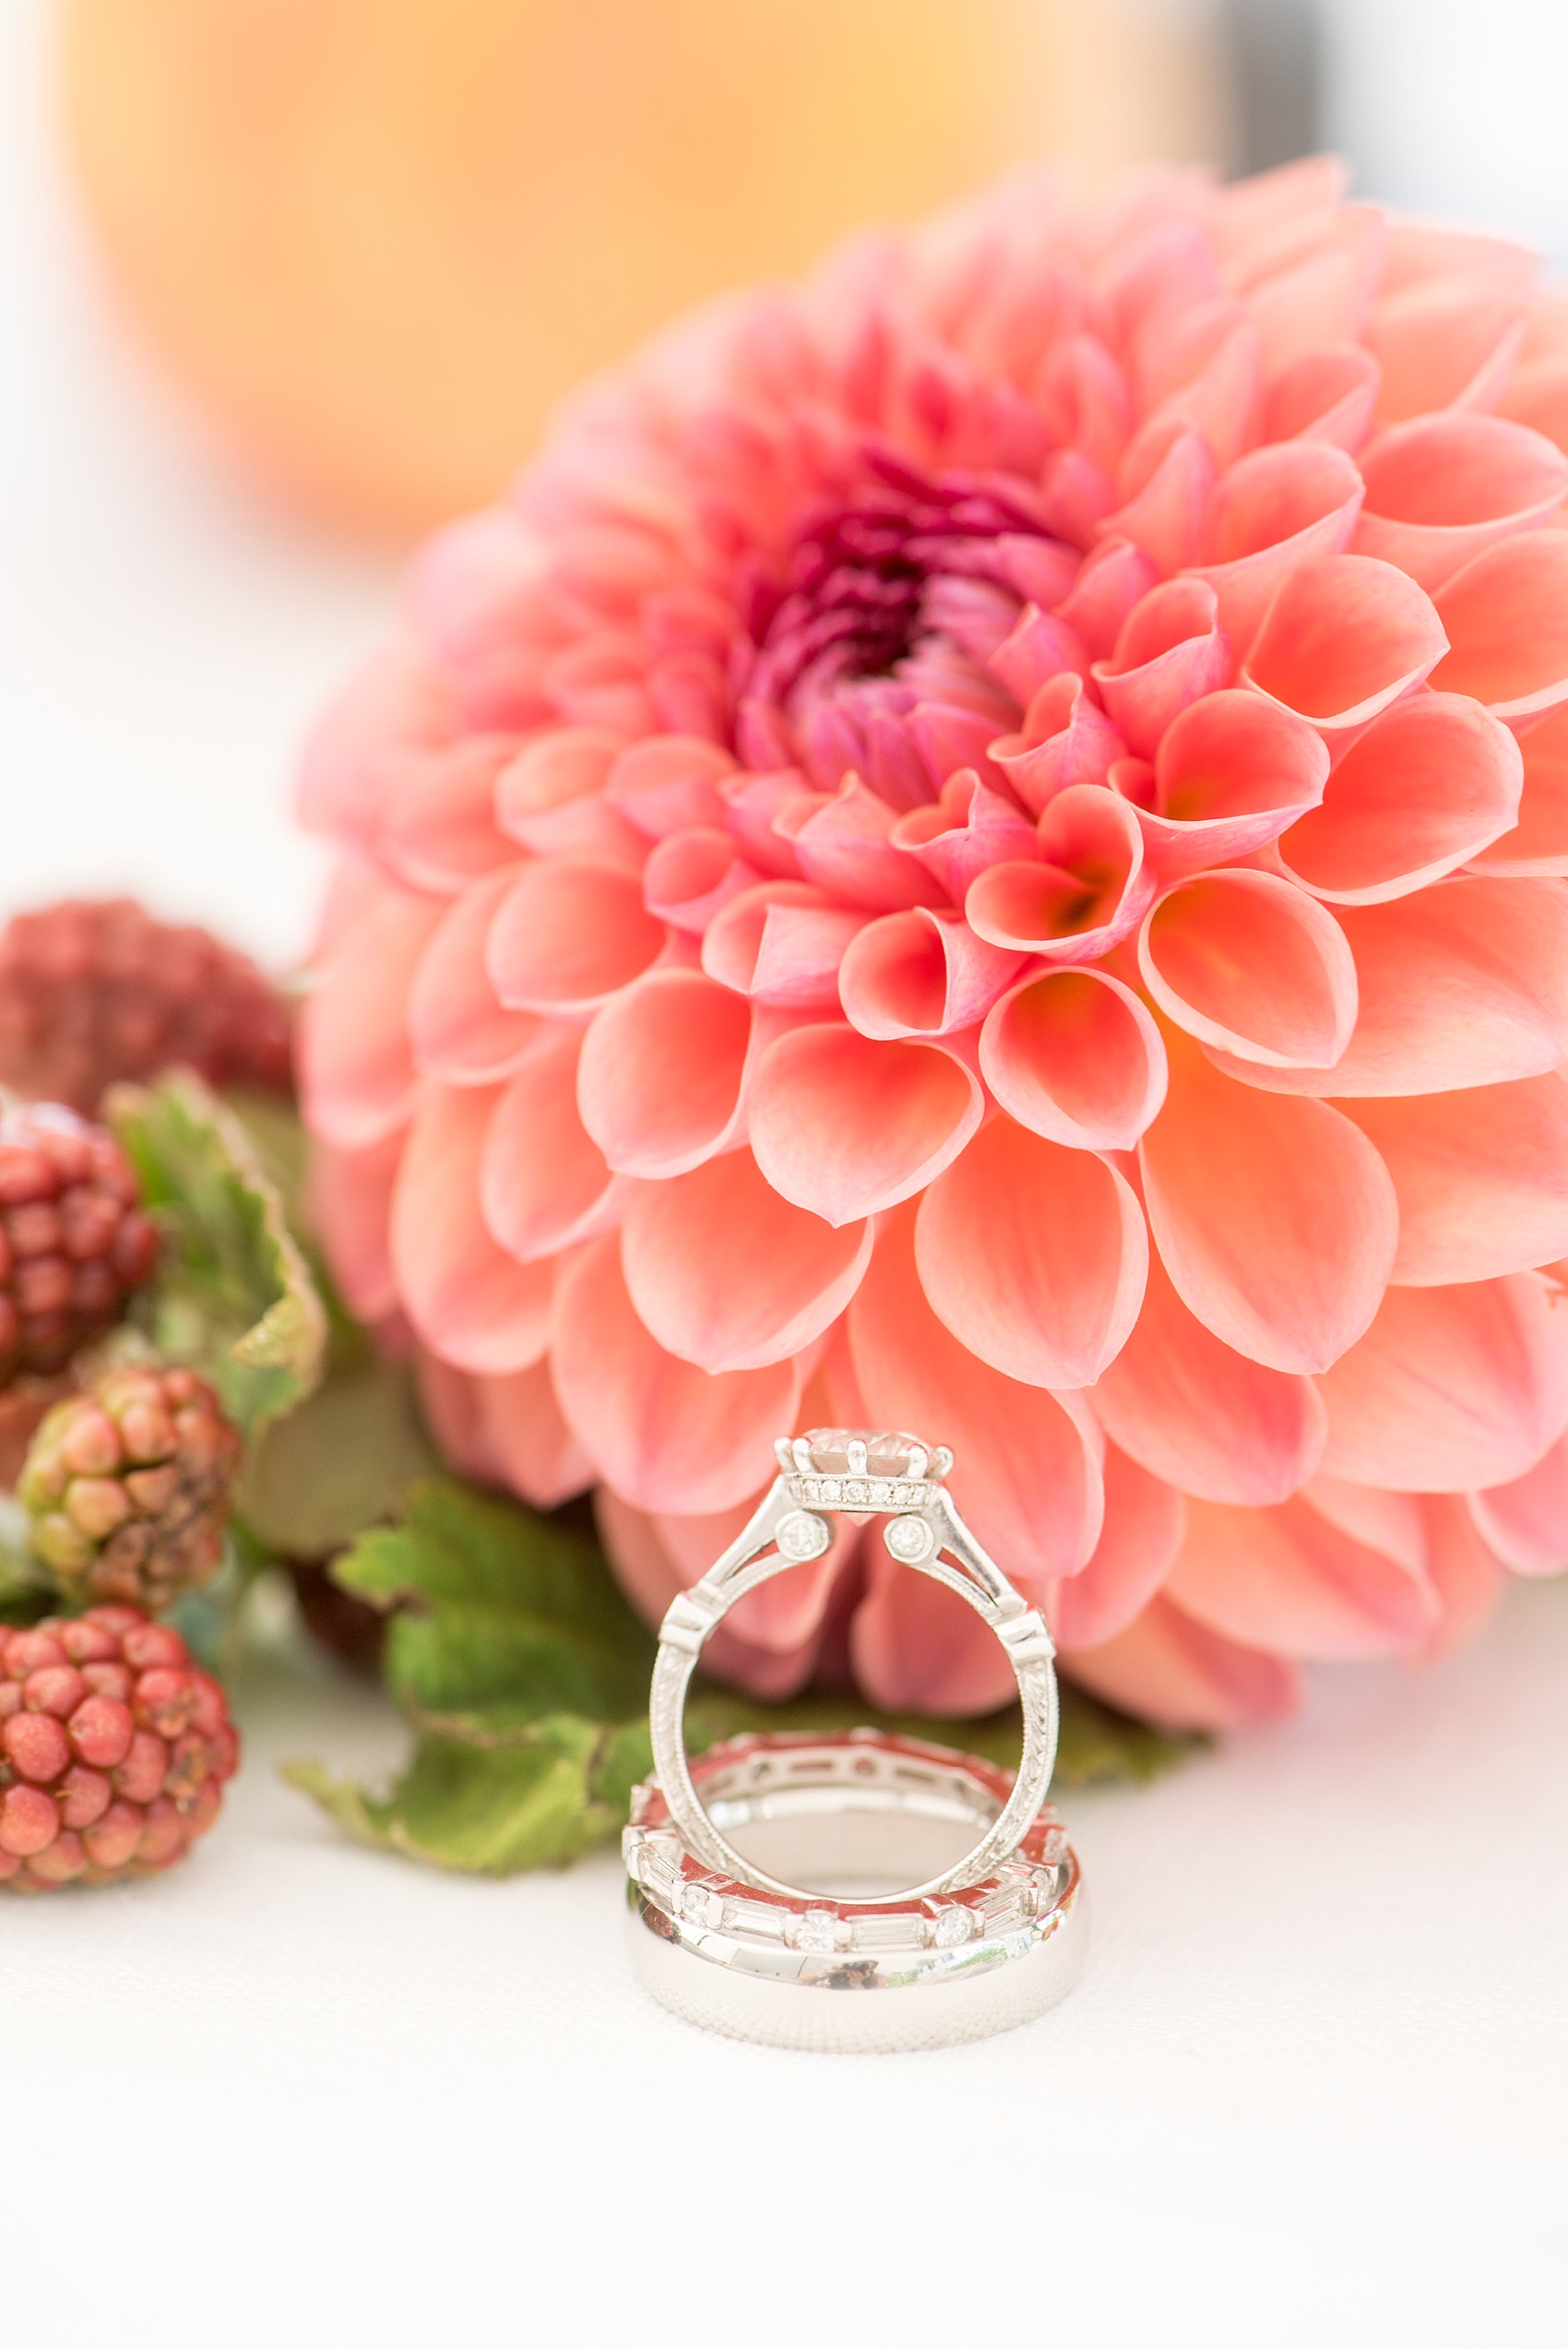 Mikkel Paige Photography photos from a wedding at Southwood Estate in Germantown, New York. Detail picture of the bride's engagement ring detail and wedding bands with a peach dahlia flower.